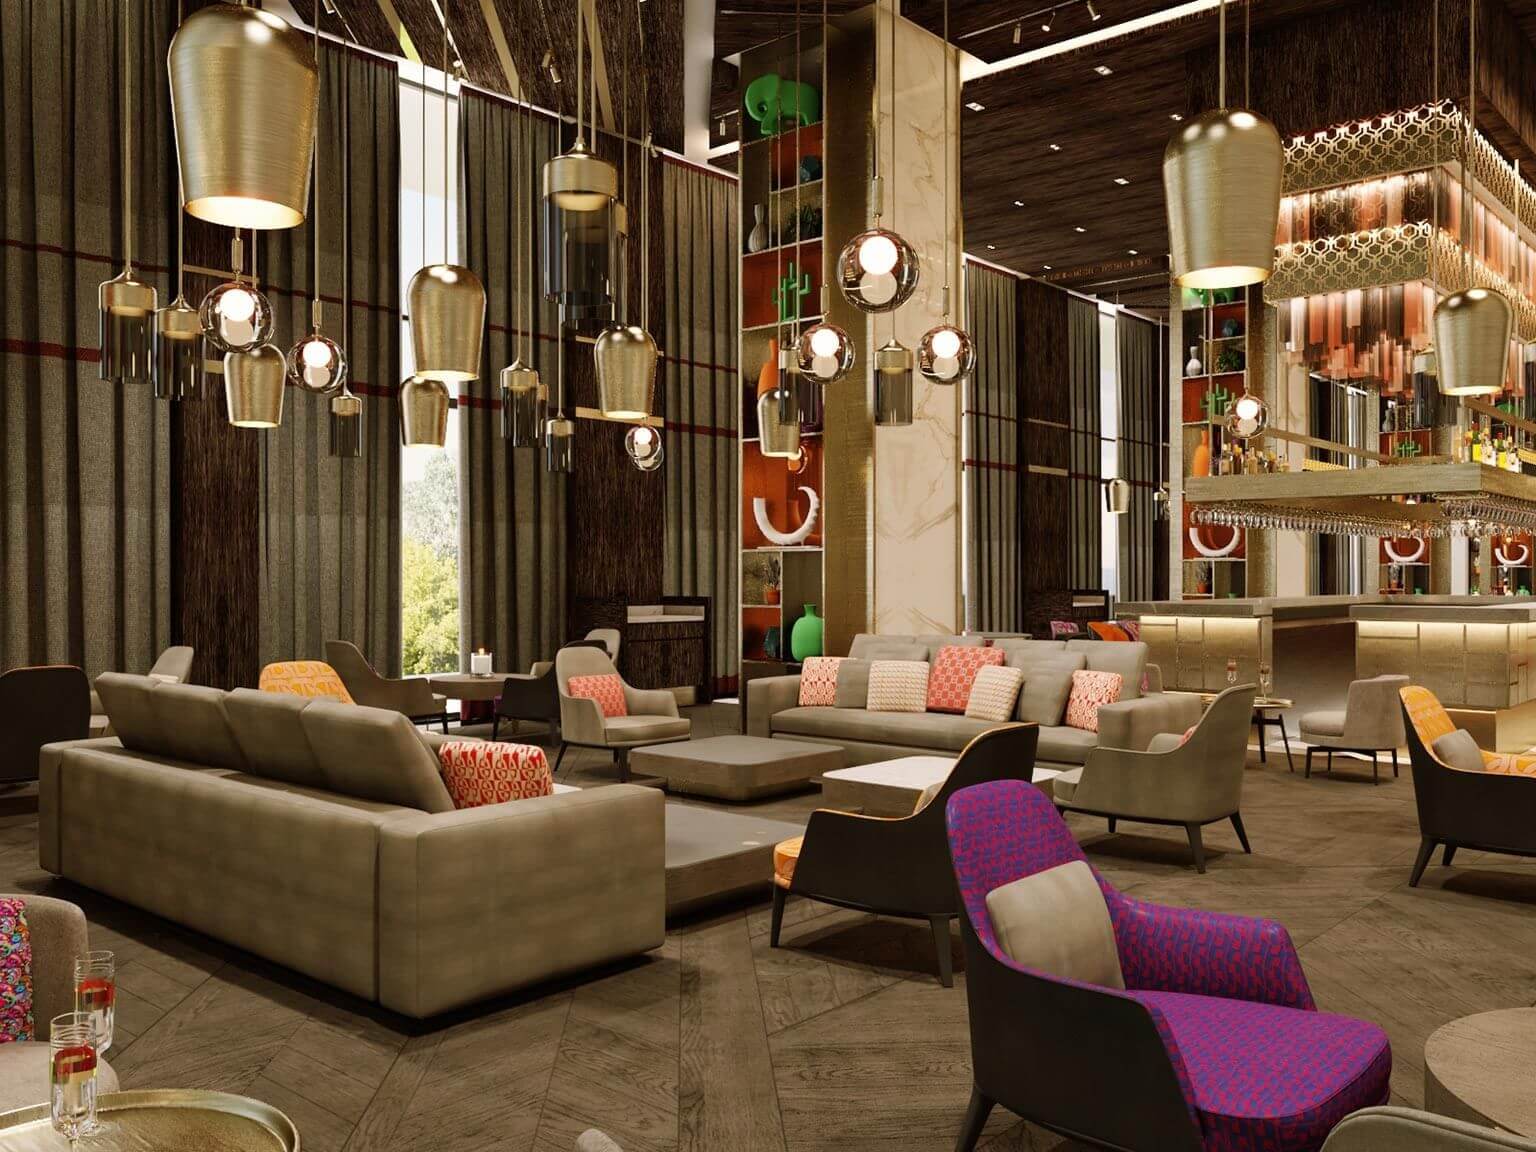 Bar area at Cullinan Belek resort in Turkey with lights hanging from ceiling, purple chair, and sofas